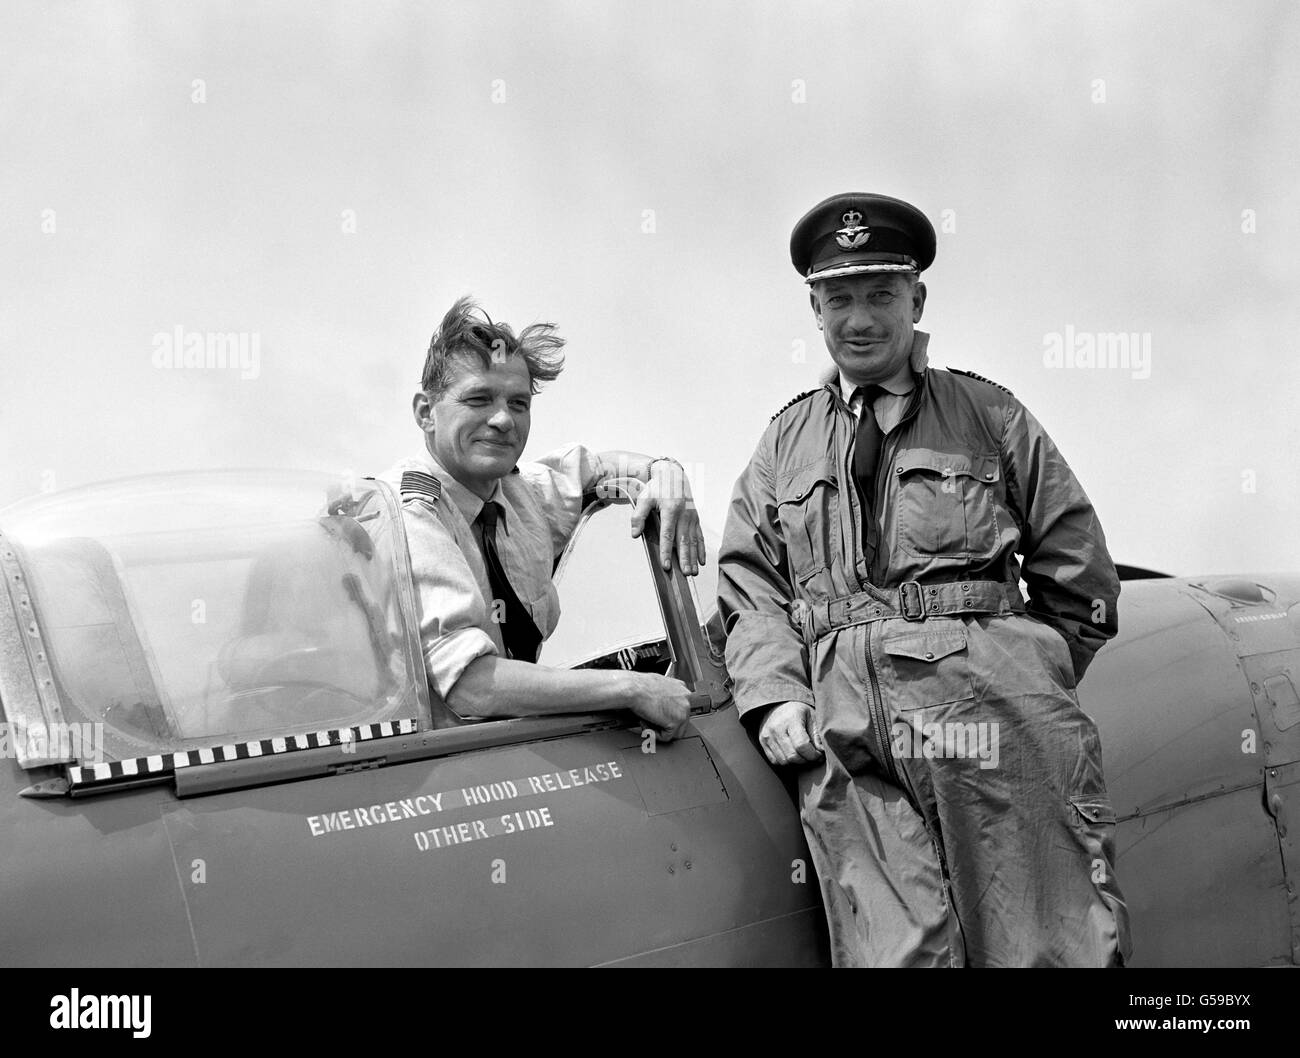 The end of a chapter in British history for RAF fighter pilots Group Captain James Edgar ('Johnnie') Johnson (in cockpit) and Group Captain James Rankin, seen at Biggin Hill, Kent, as they brought in two of the last three Spitfires for their 'retirement'. Johnson was the top scoring Allied fighter pilot of the Second World War against the Luftwaffe, with 38 kills and Rankin had 22 'kills' to his name. Stock Photo